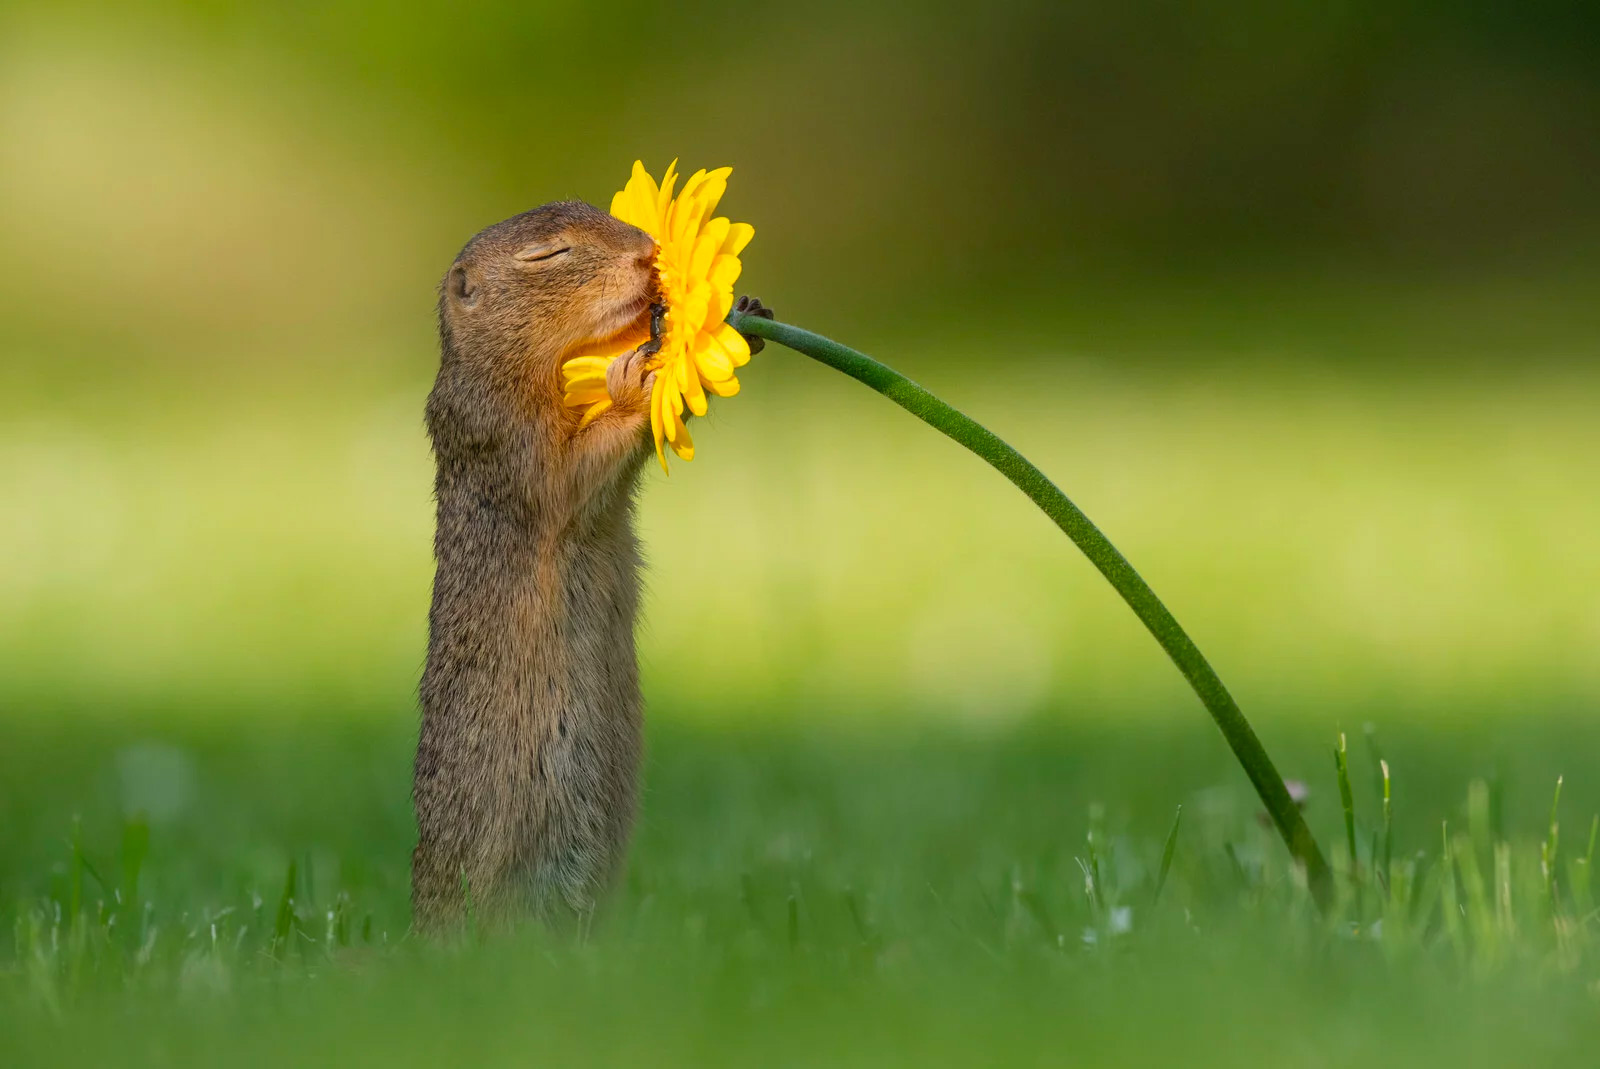 Dick van Duijn Captured an Beautiful Moment of Ground Squirrel and a Yellow Flower